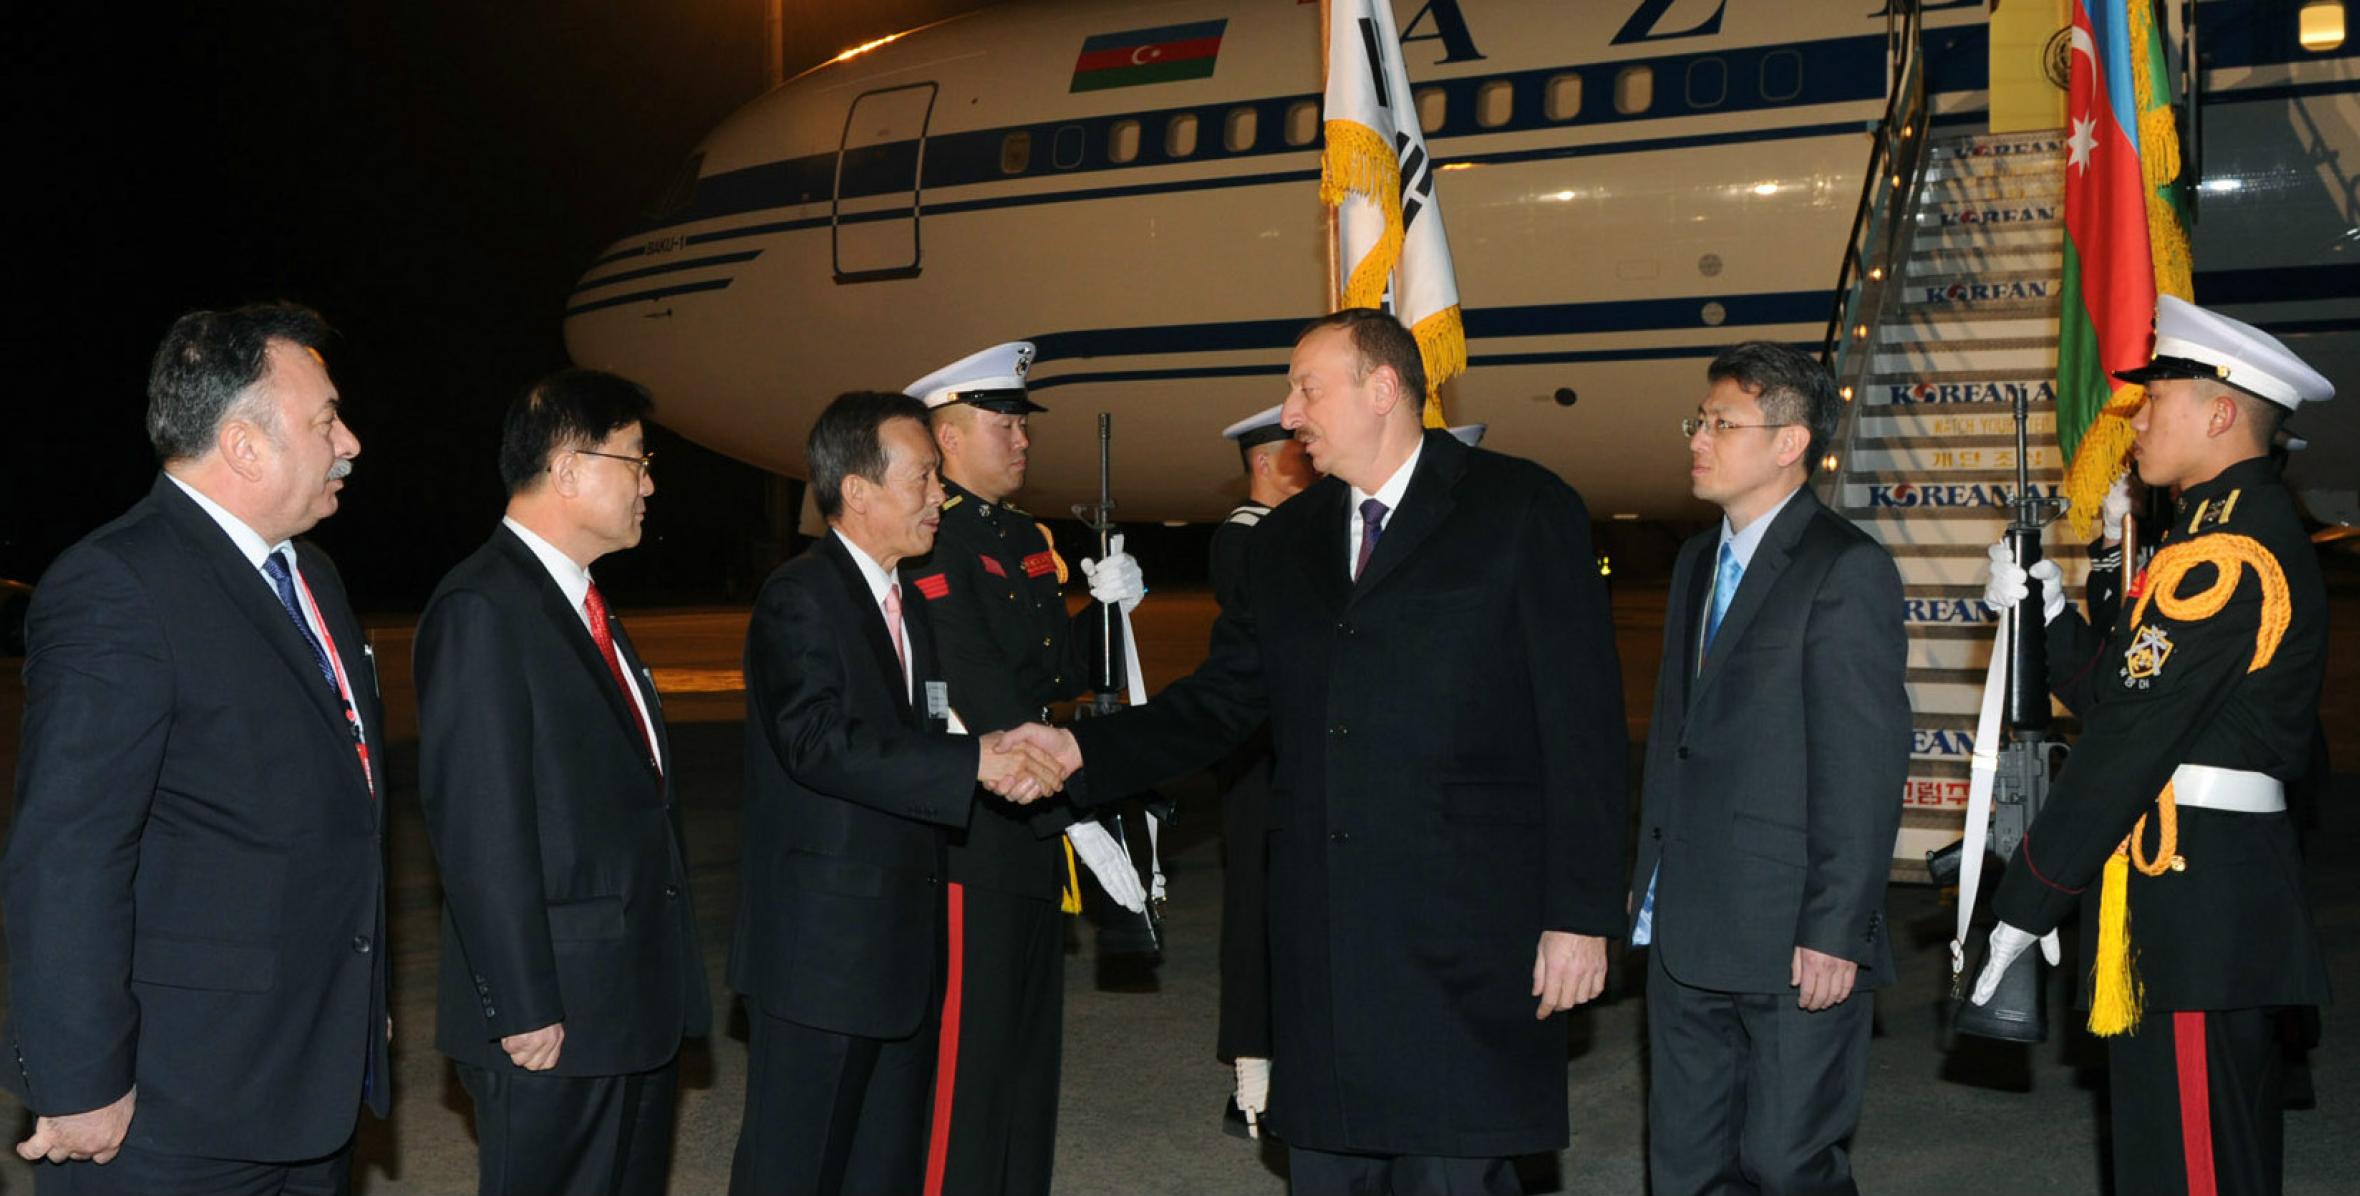 Ilham Aliyev arrived in the Republic of Korea on a working visit